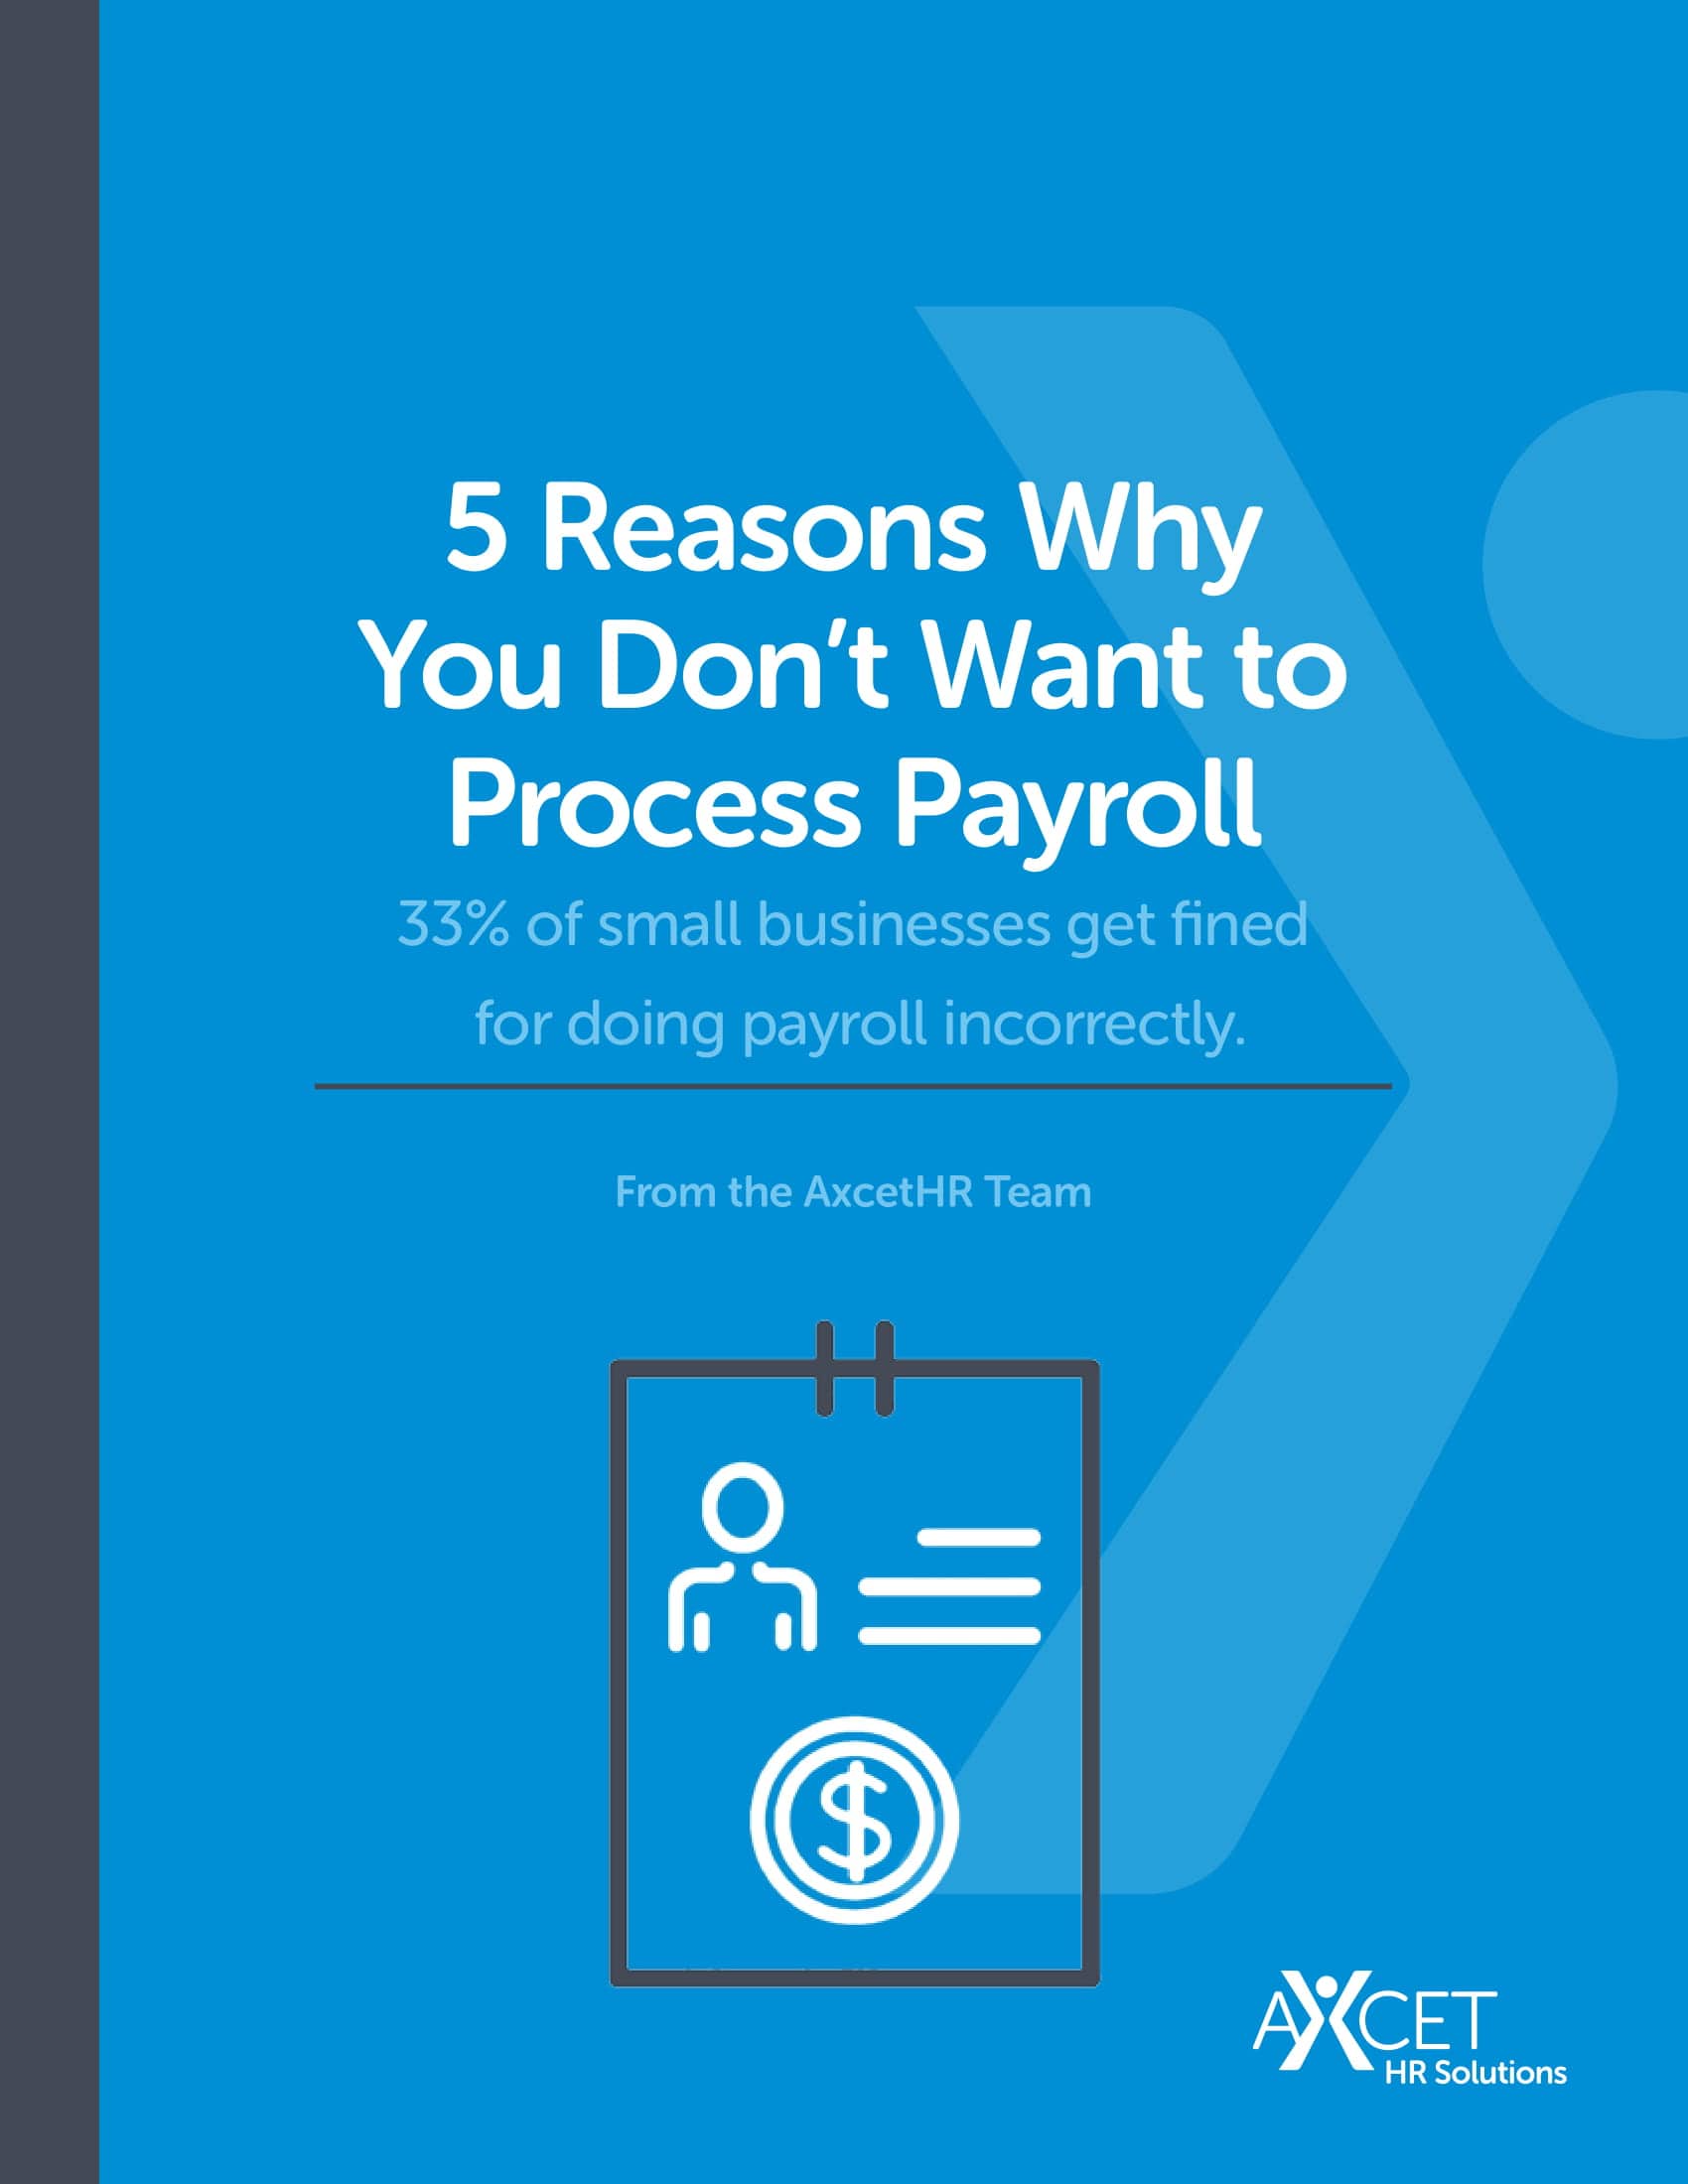 5 Reasons You Do Not Want to Process Payroll